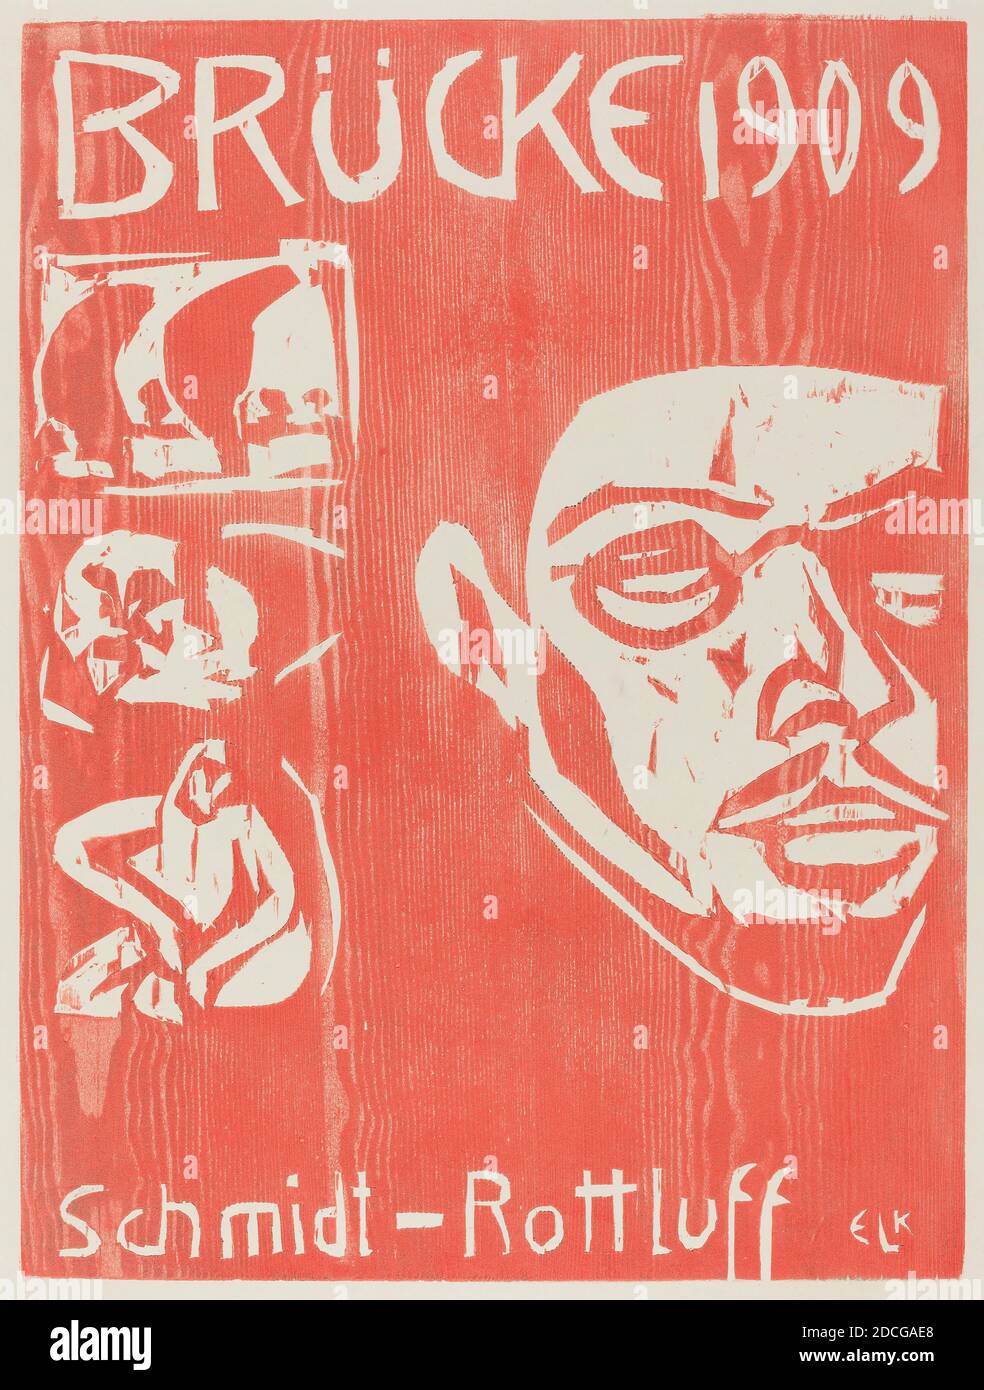 Ernst Ludwig Kirchner, (artist), German, 1880 - 1938, Cover of the Fourth Yearbook of the Artist Group the Brucke, 1909, woodcut in red Stock Photo